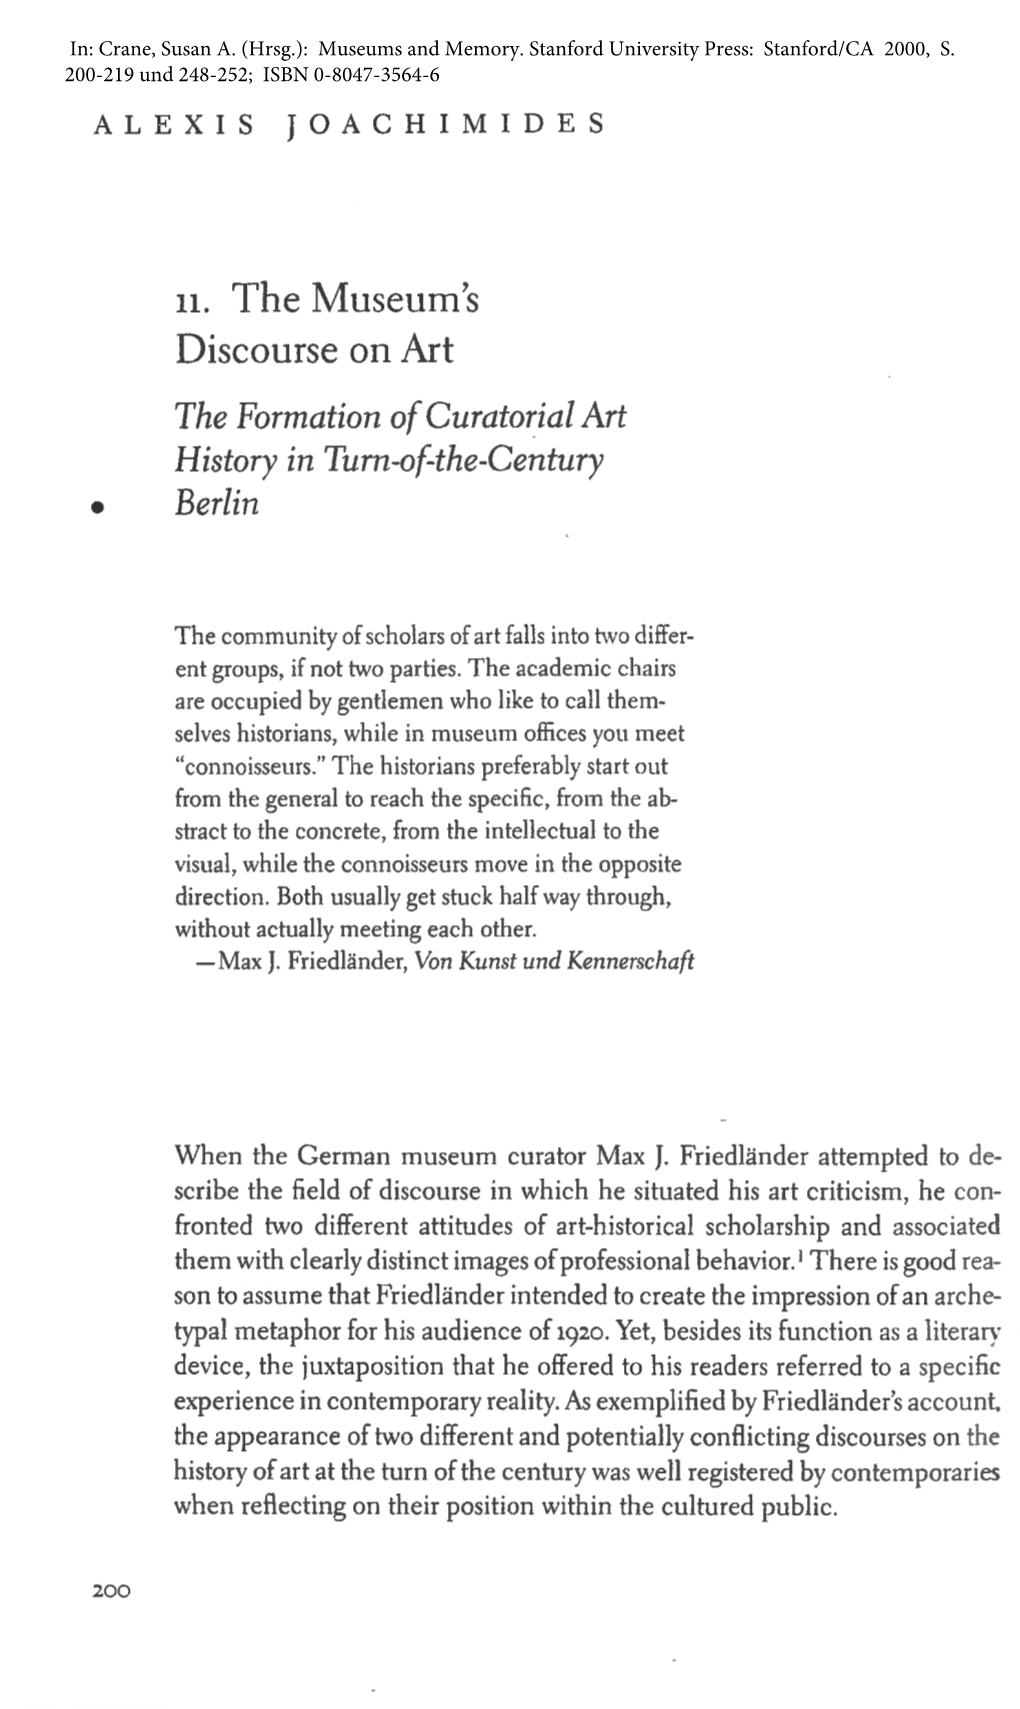 The Museum's Discourse on Art. the Formation of Curatorial Art History in Turn-Of-The-Century Berlin